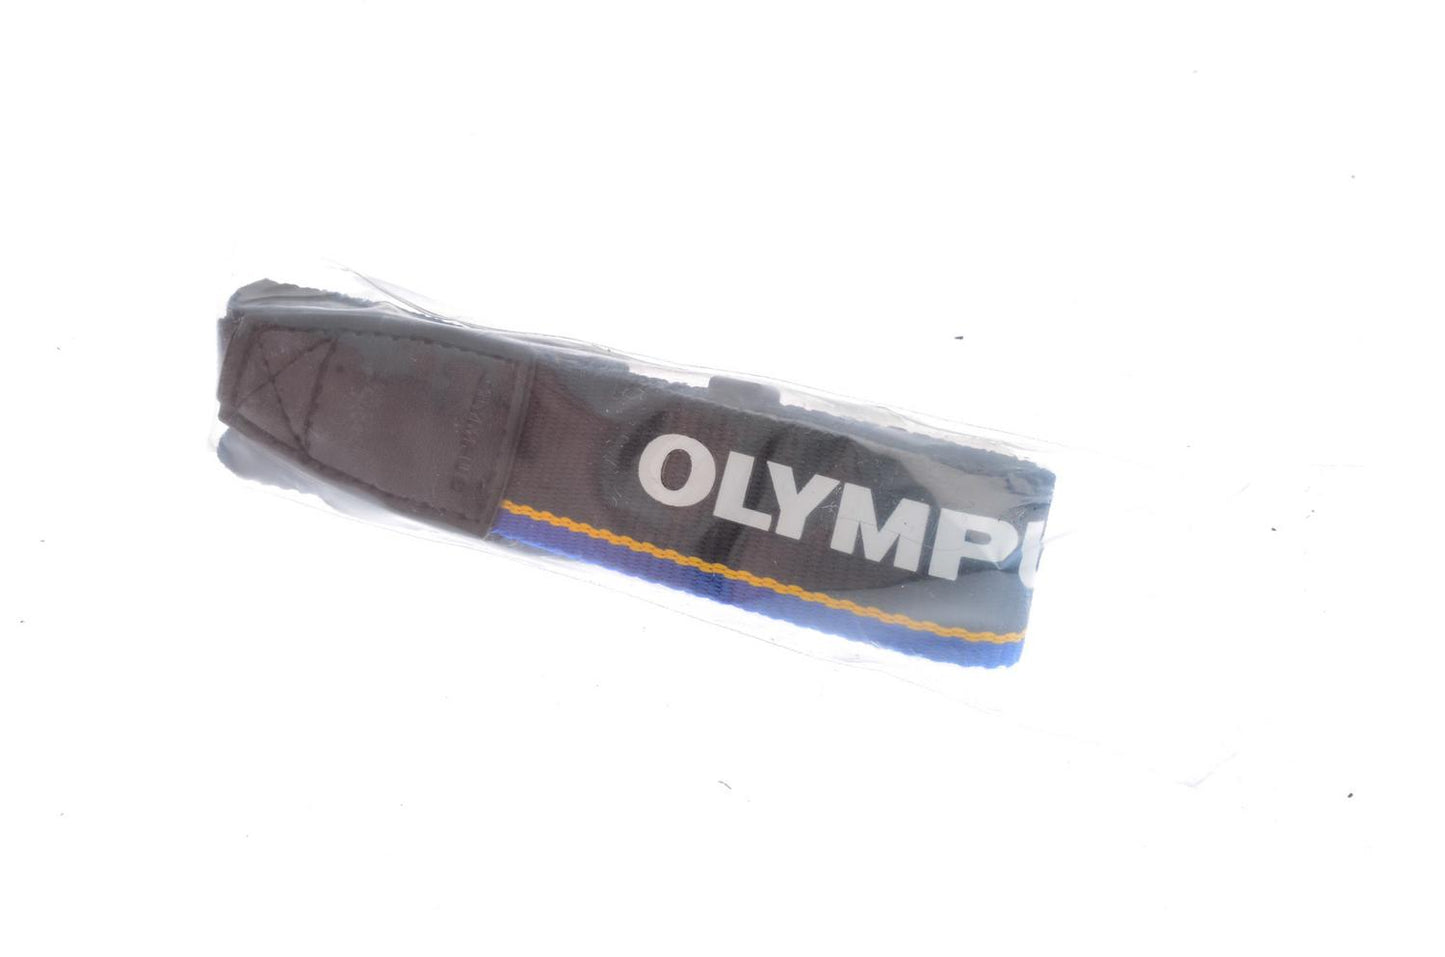 Olympus OM-D Neck Strap - Accessory